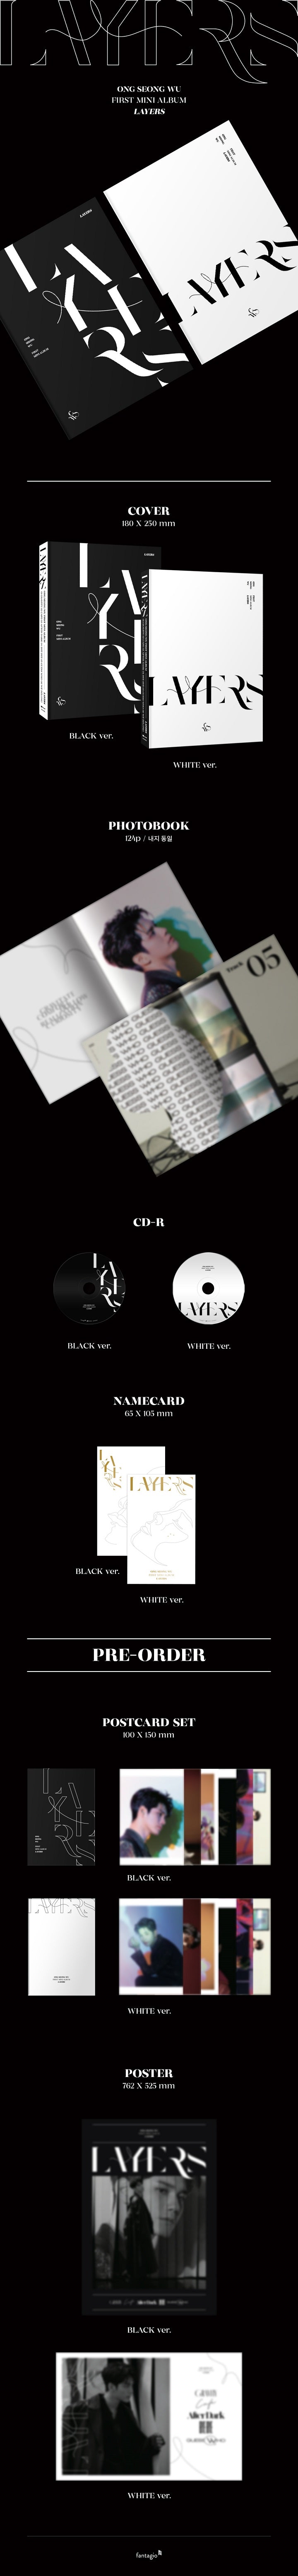 1 CD
1 Photo Book (124 pages)
1 Namecard